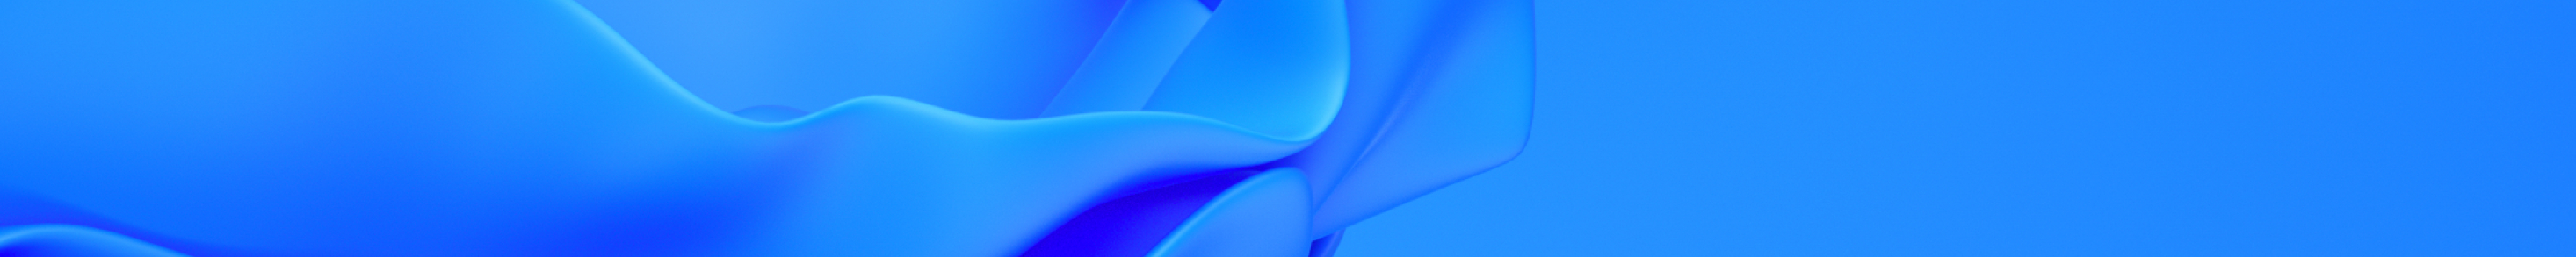 2932x293 Windows 11 Style Abstract 2932x293 Resolution Wallpaper, HD